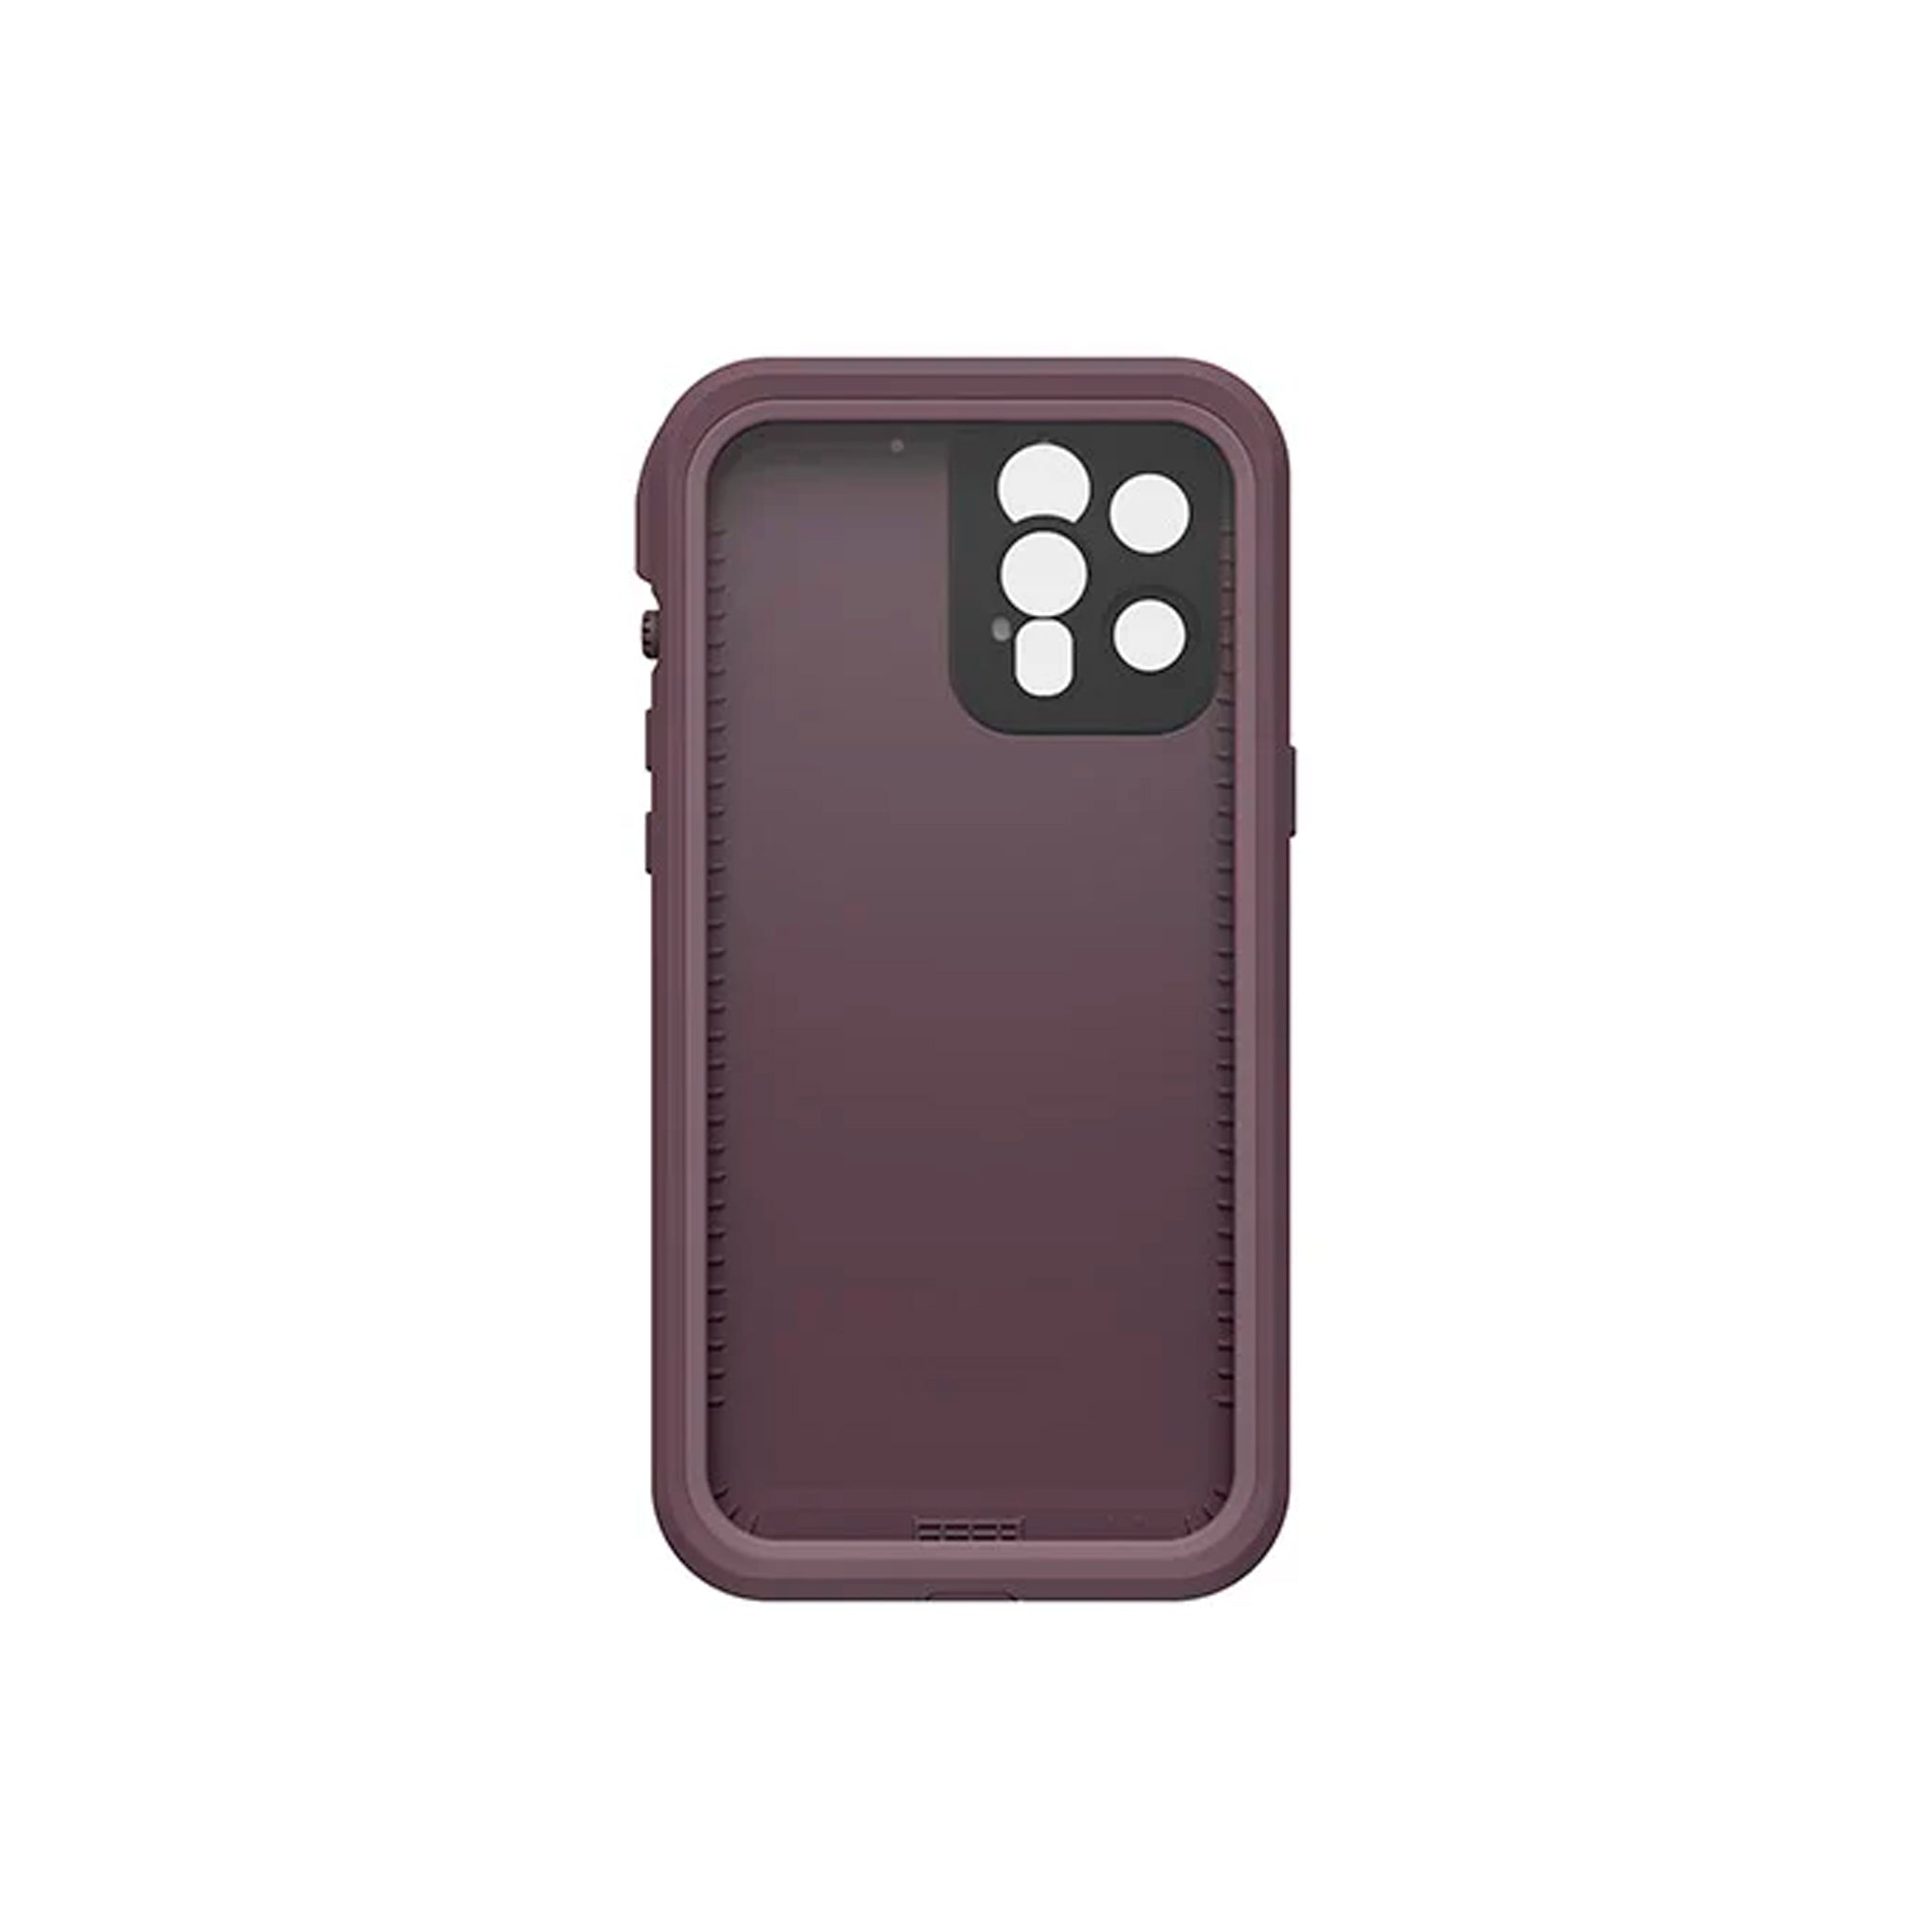 LifeProof -  Fre for iPhone 12 Pro Max - Ocean Violet